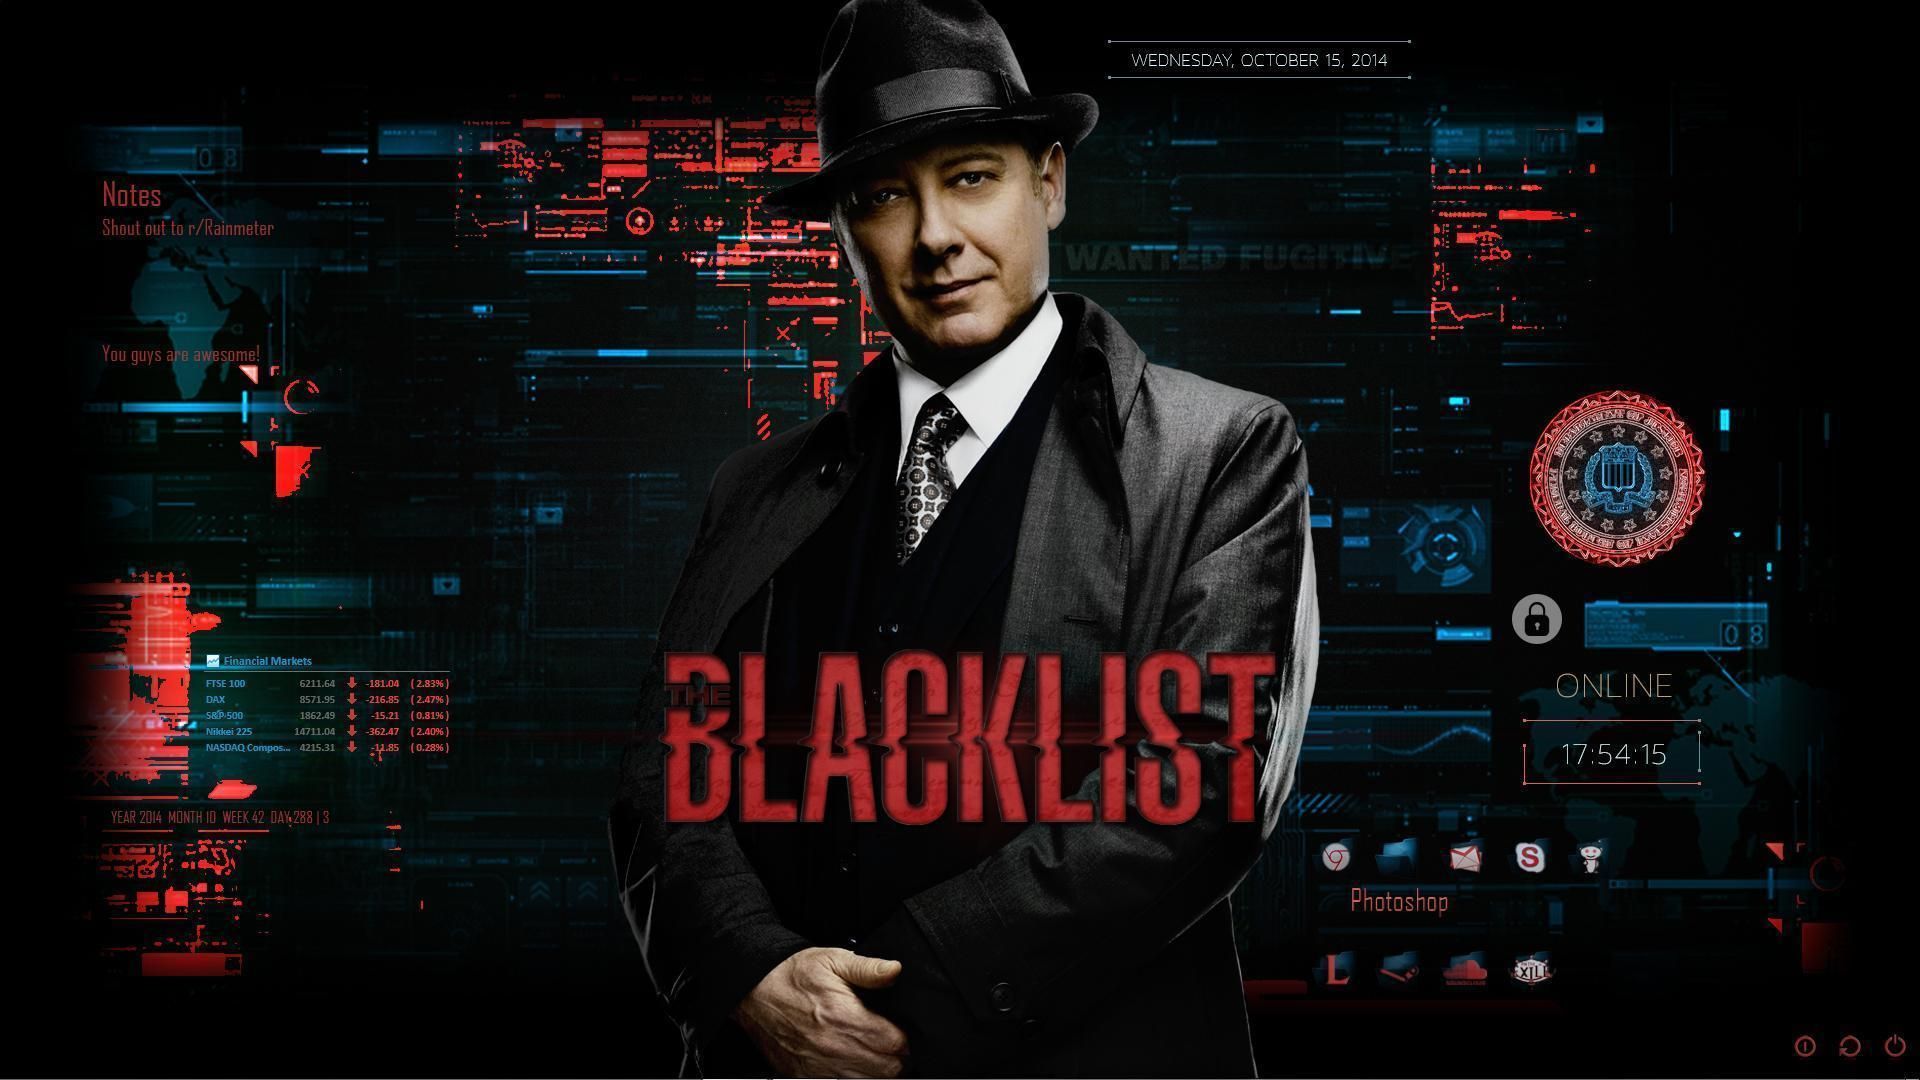 NBC's The Blacklist leads the way in fighting off COVID